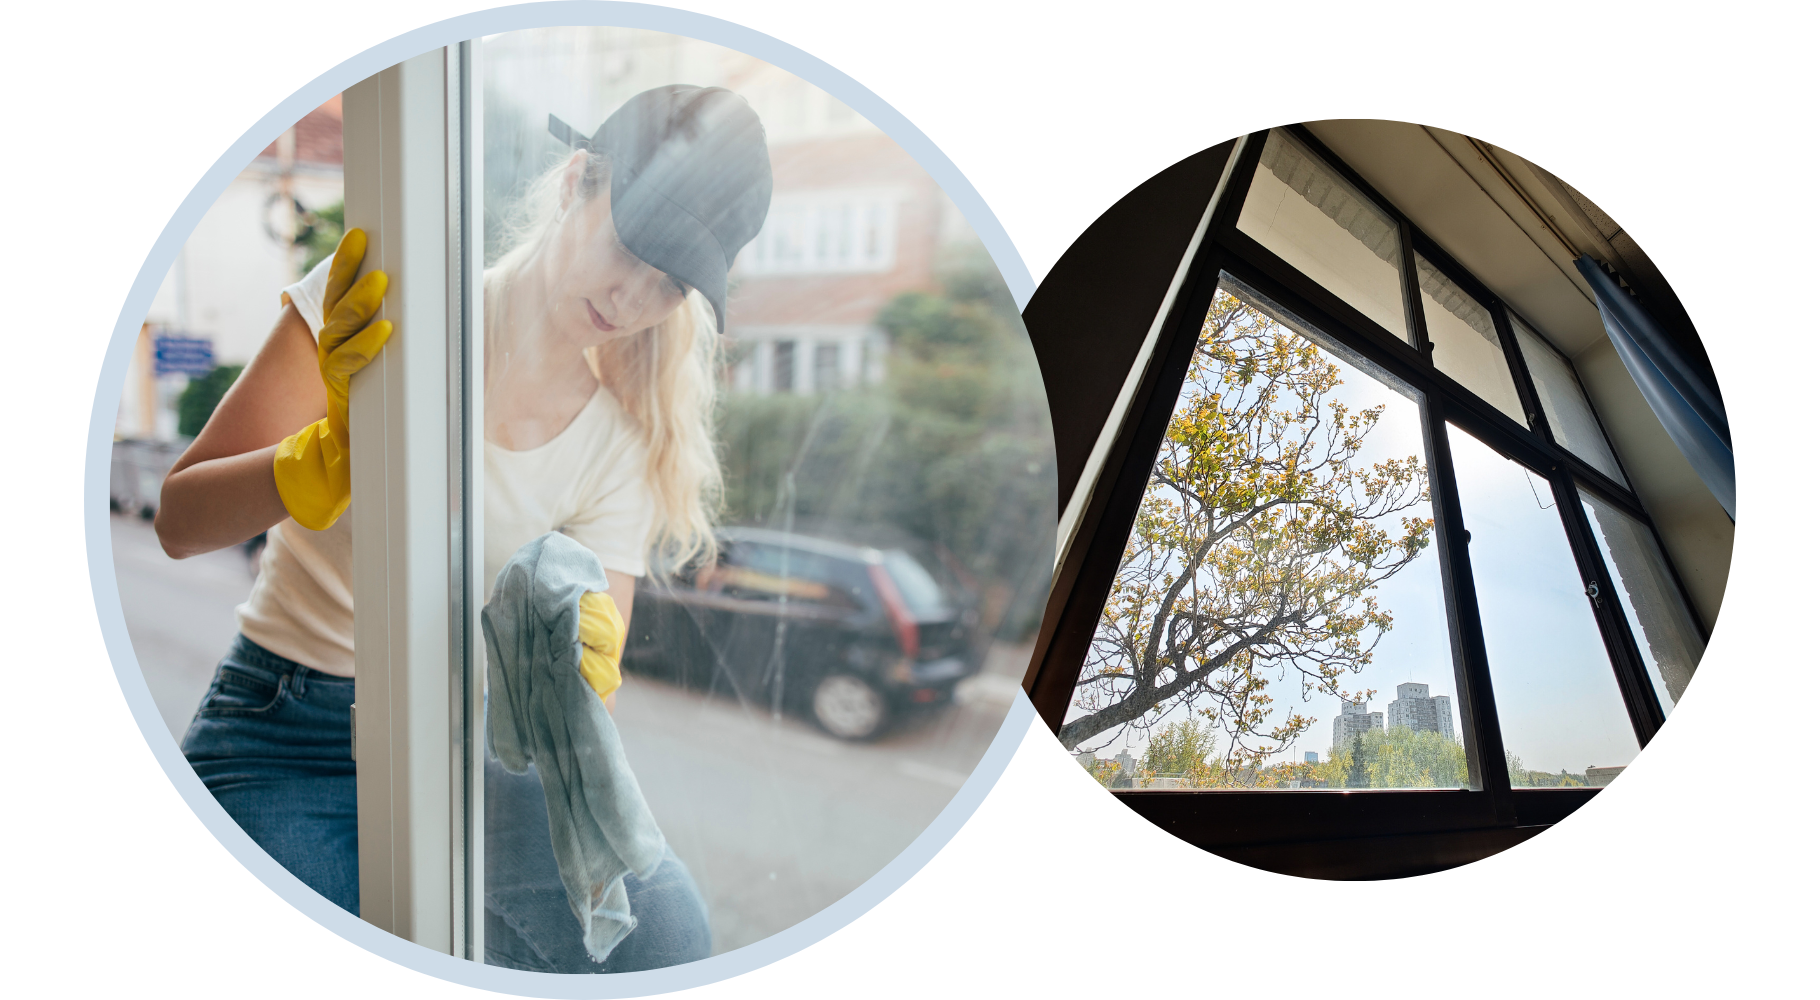 window cleaning services in liverpool image 106